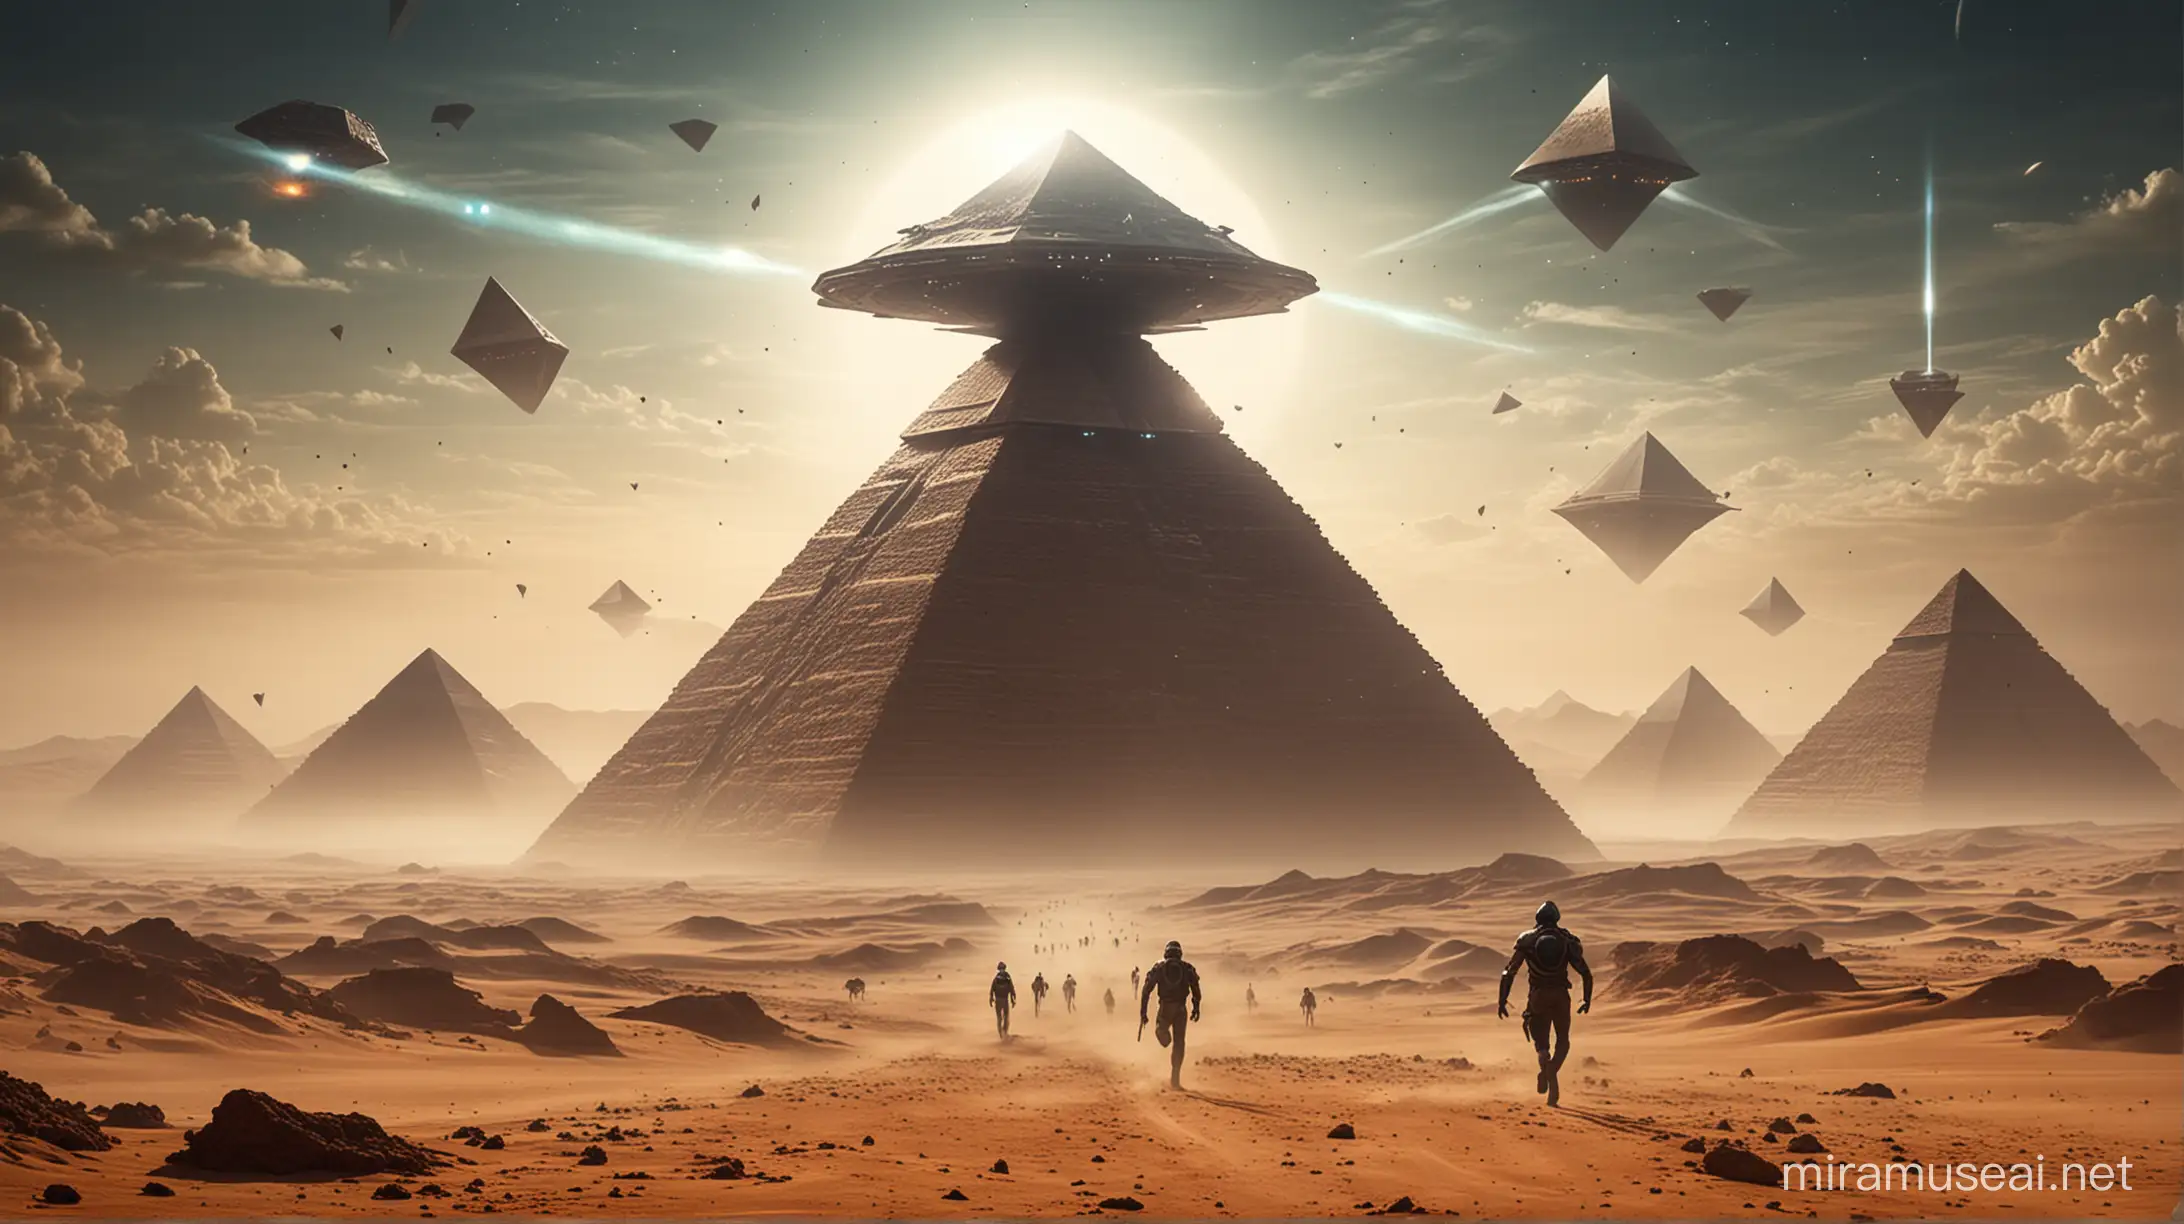 Ancient Pyramids Encounter Spaceships and Aliens